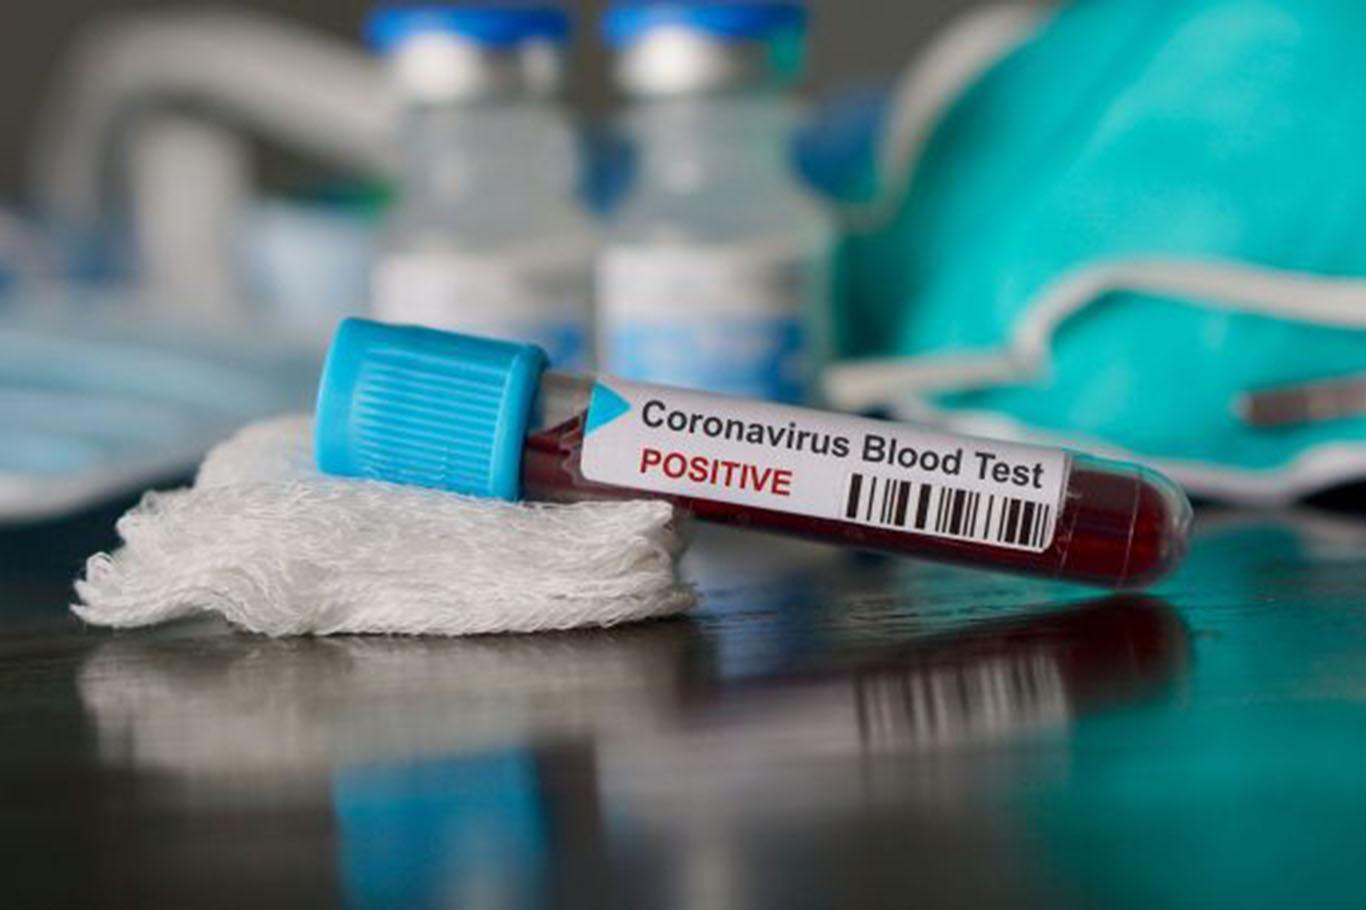 India reports 9,851 new coronavirus cases in a single day